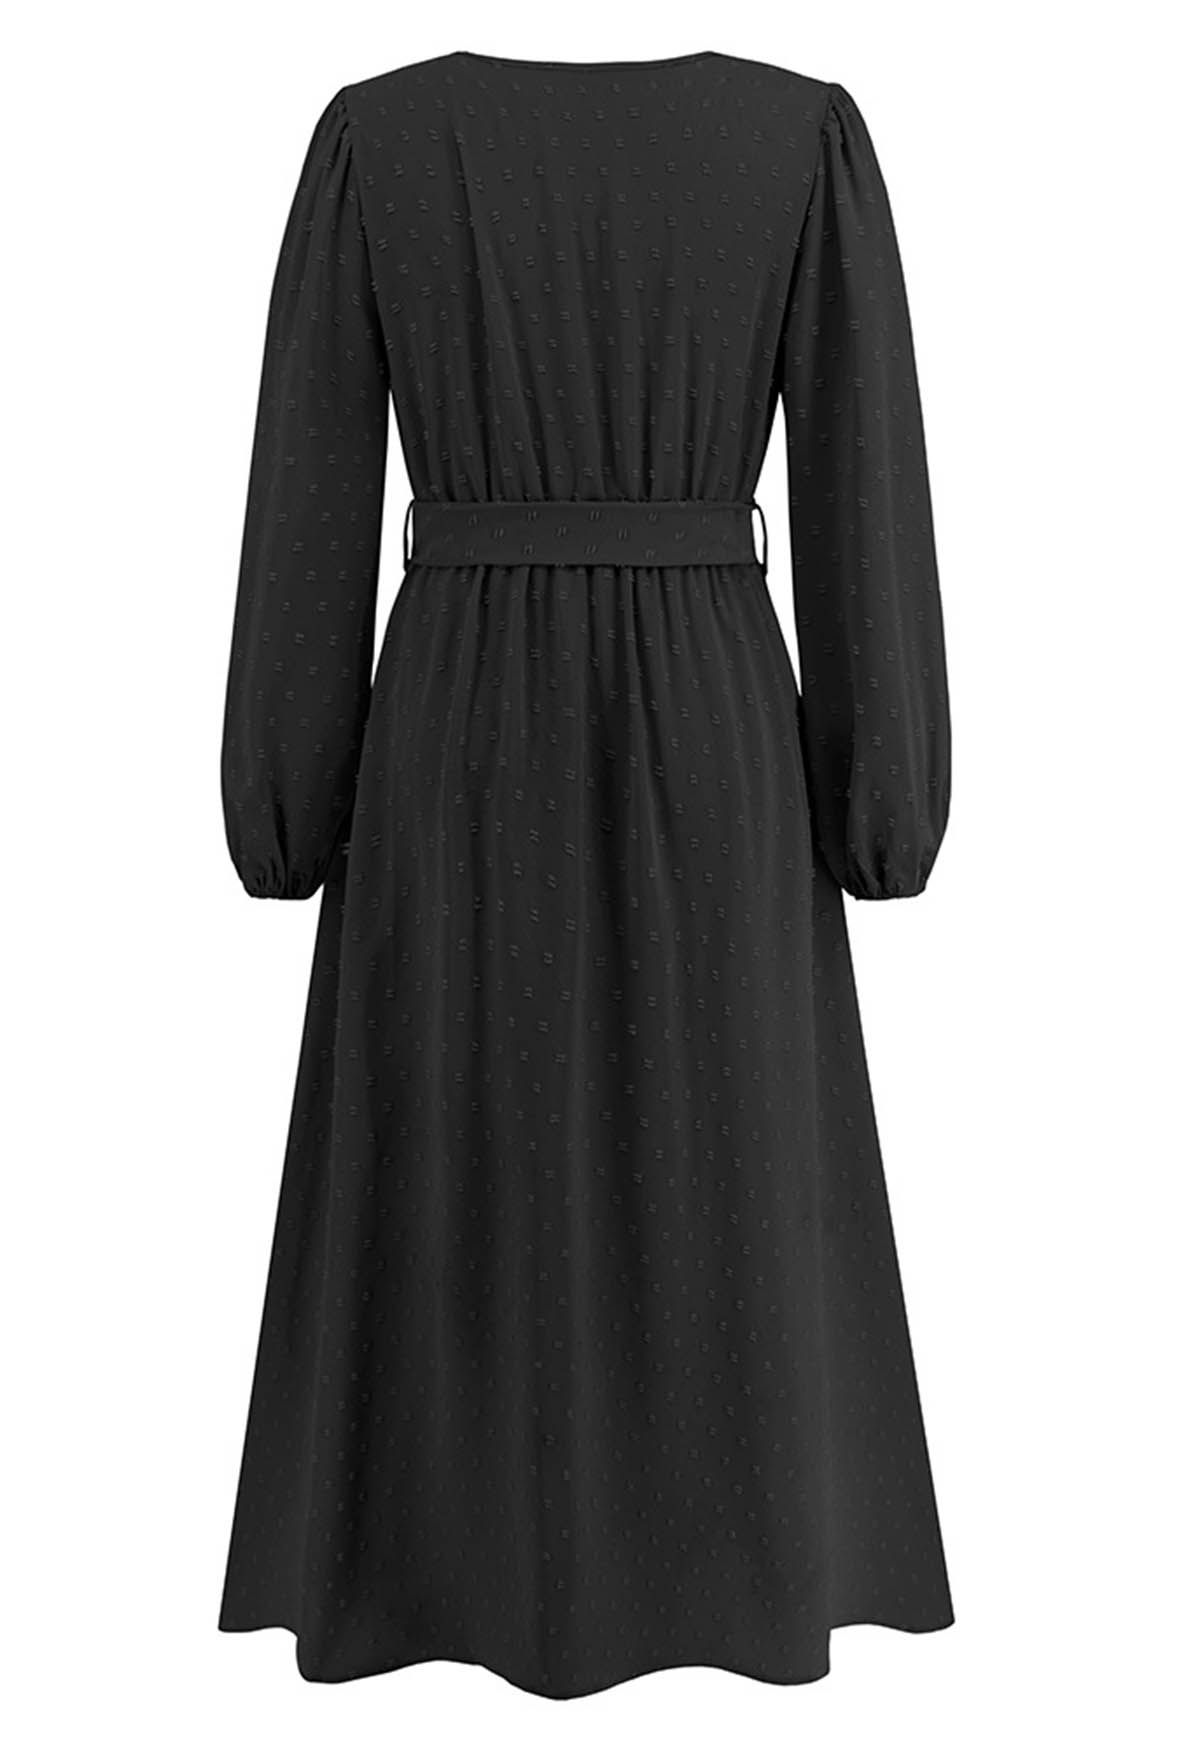 Flock Dot Jacquard Faux-Wrap Belted Dress in Black - Retro, Indie and ...